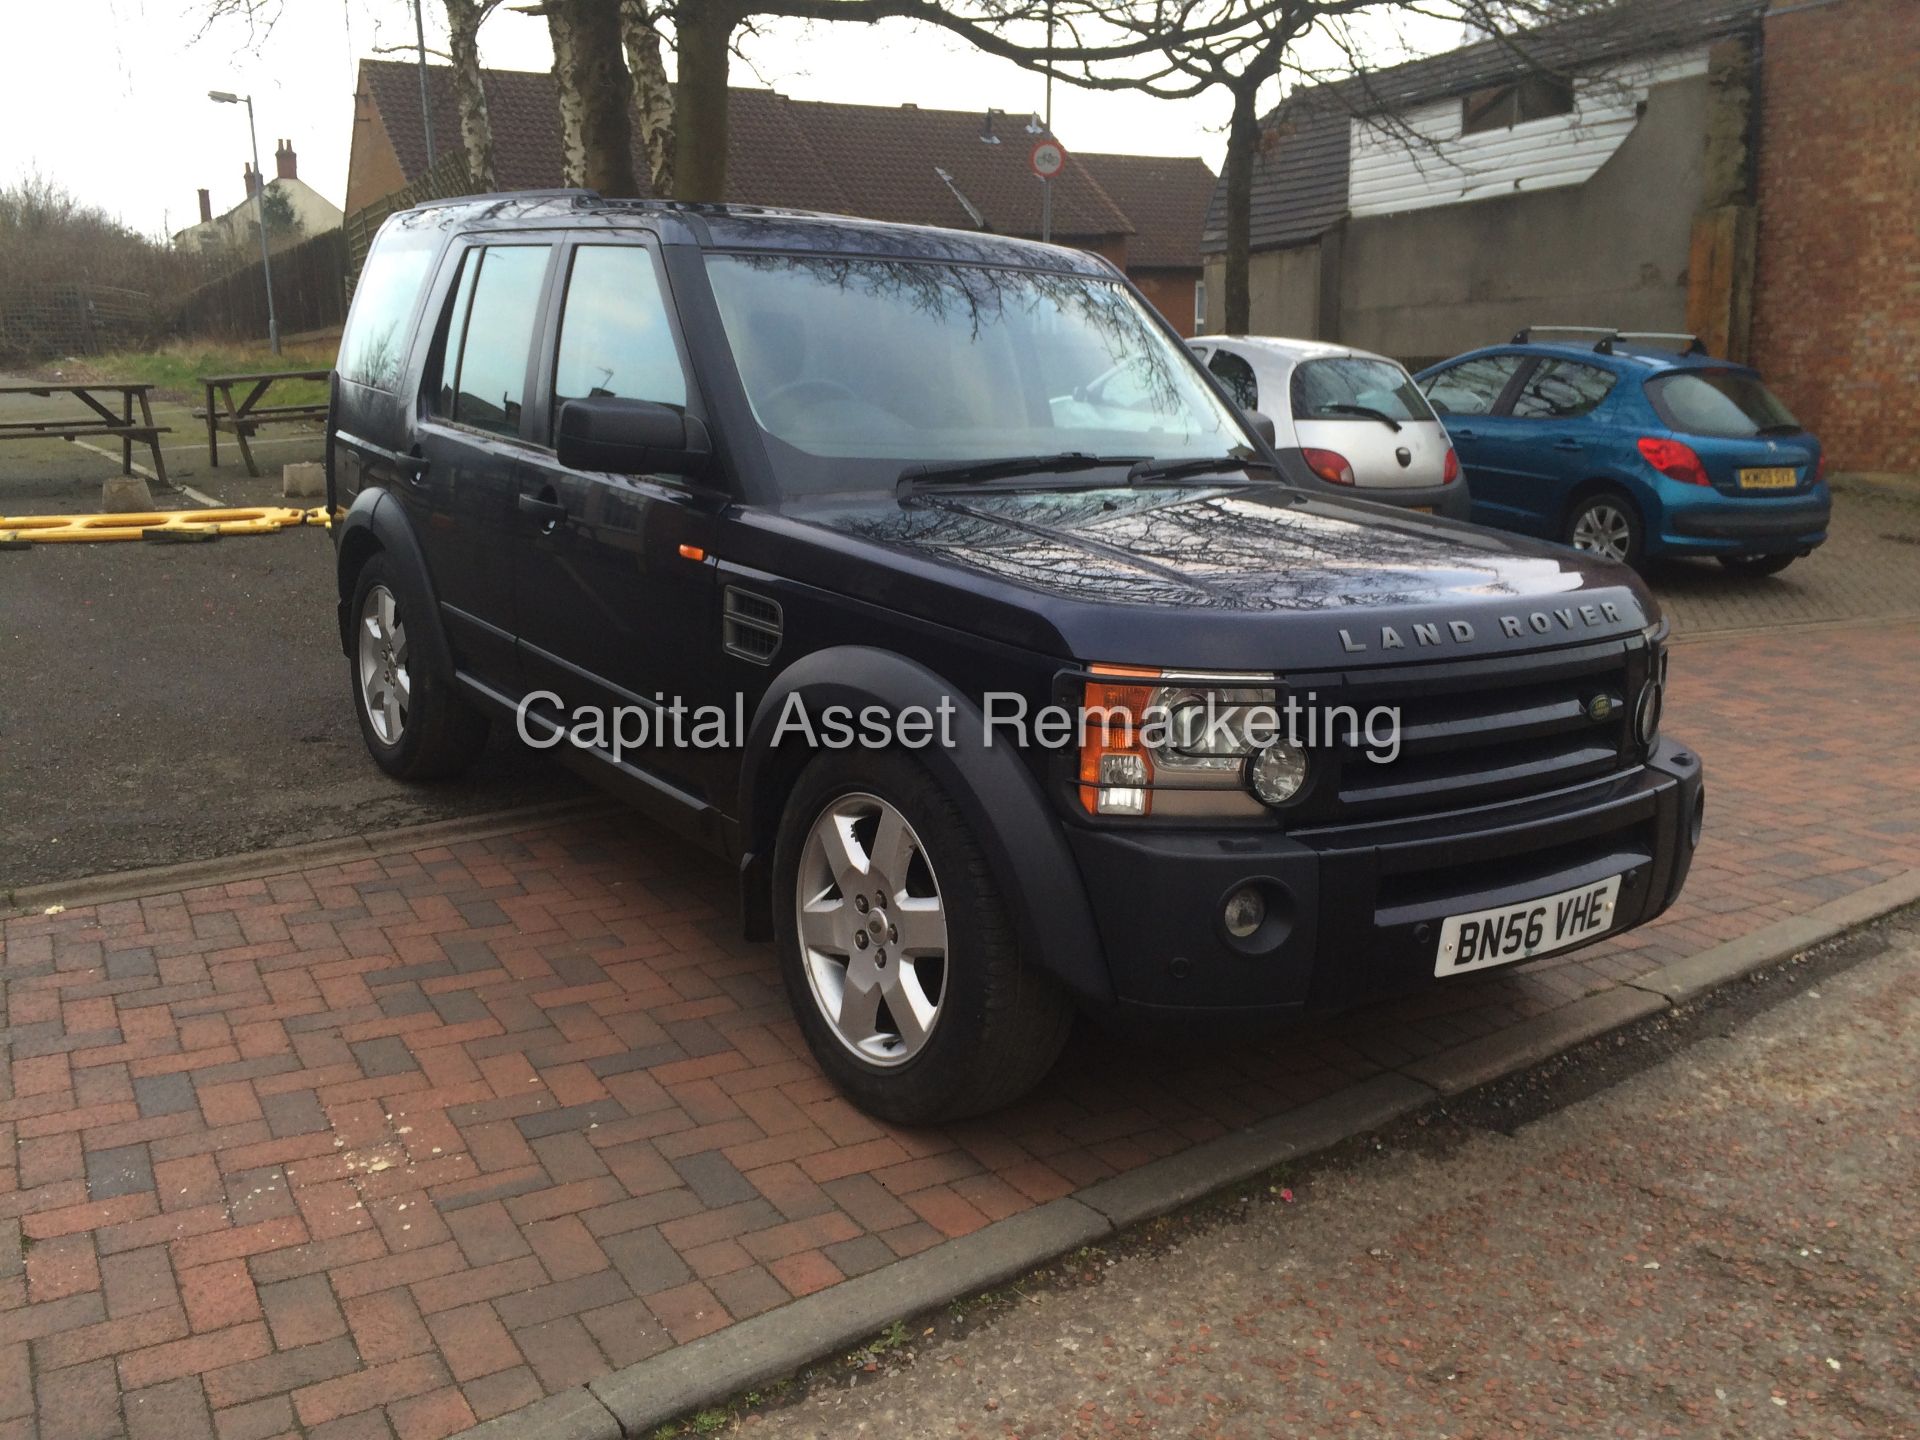 (ON SALE) LAND ROVER DISCOVERY 3 "HSE - AUTO" 7 SEATER (2007 MODEL) SAT NAV - LEATHER - NO VAT - Image 3 of 20